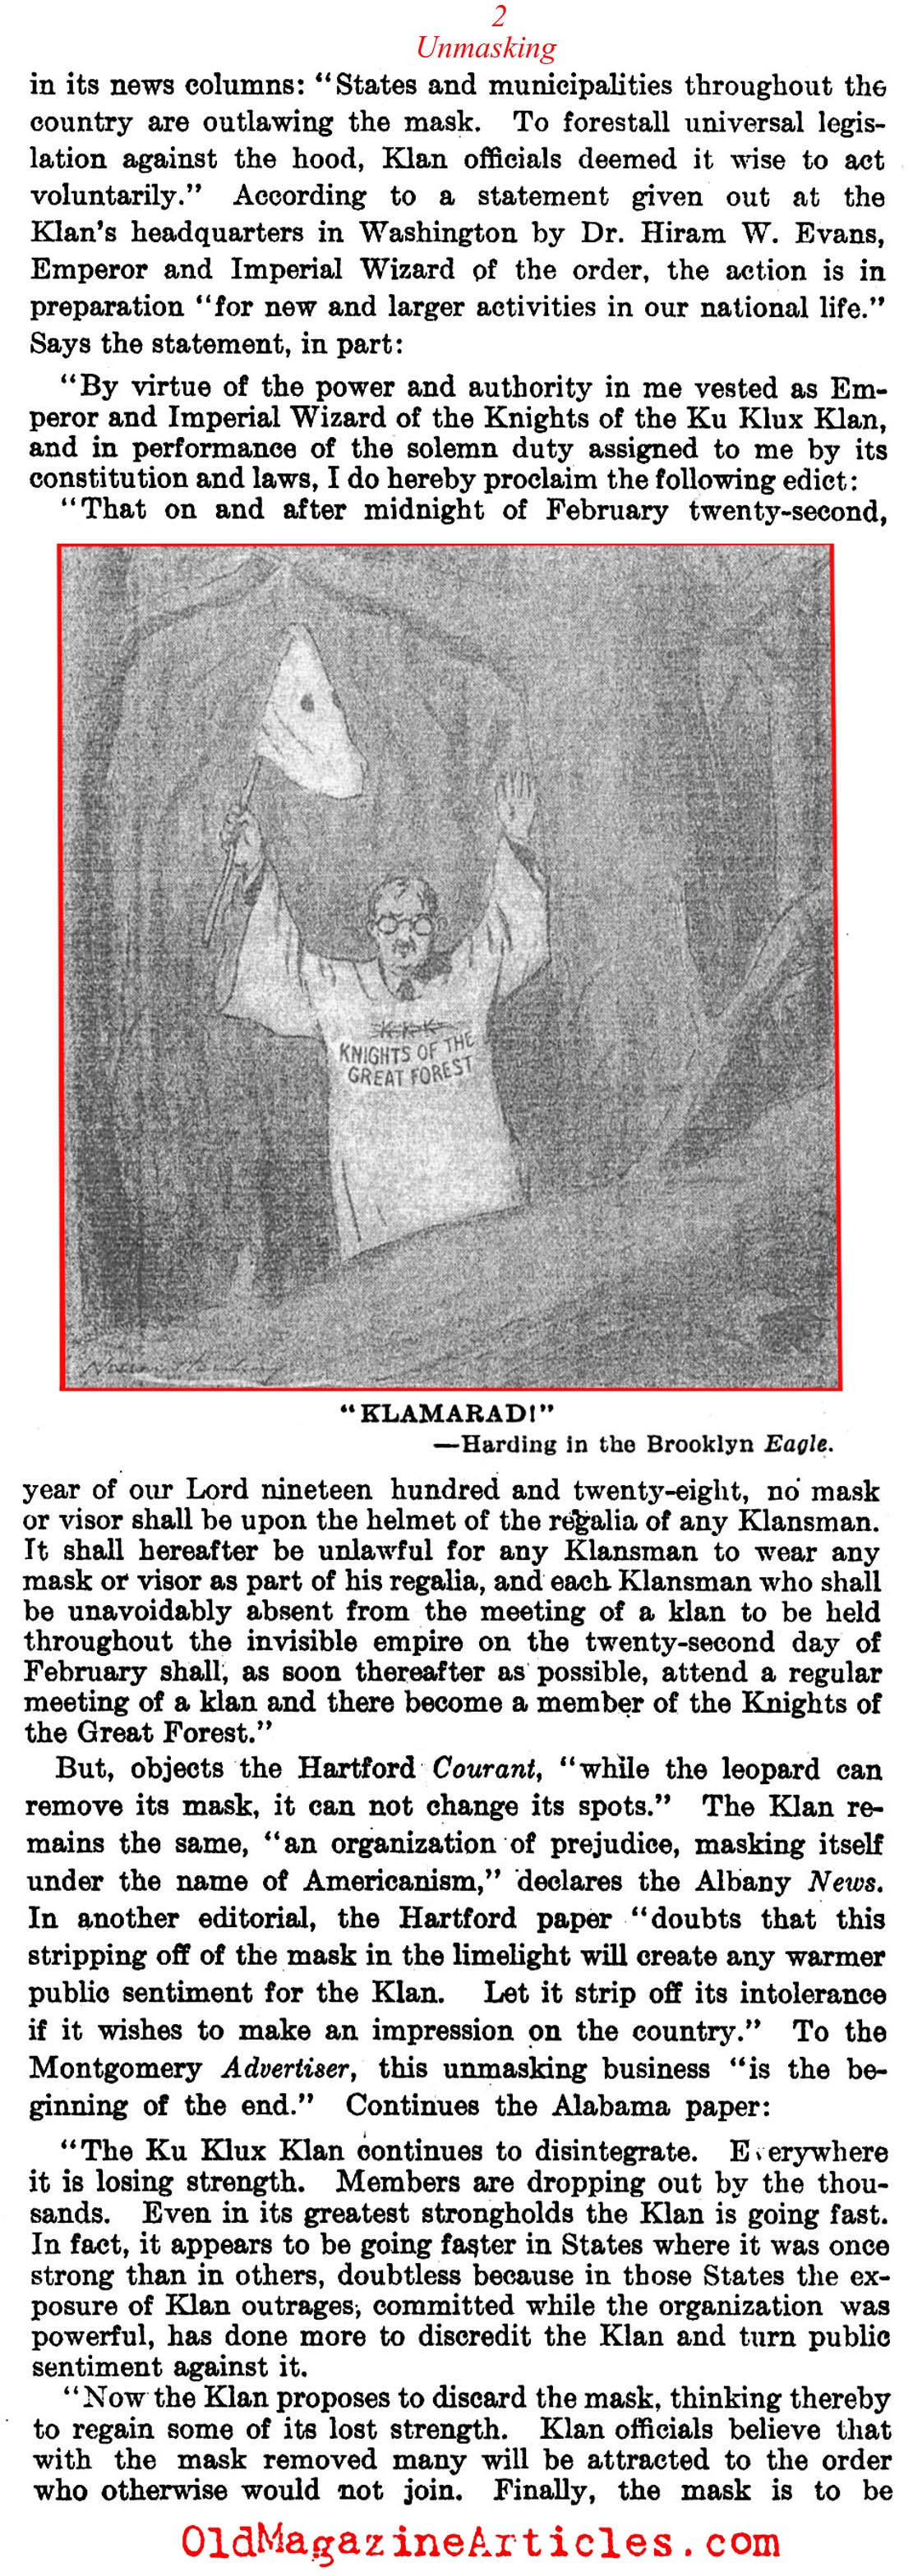 The KKK Fall from Fashion  (The Literary Digest, 1928)